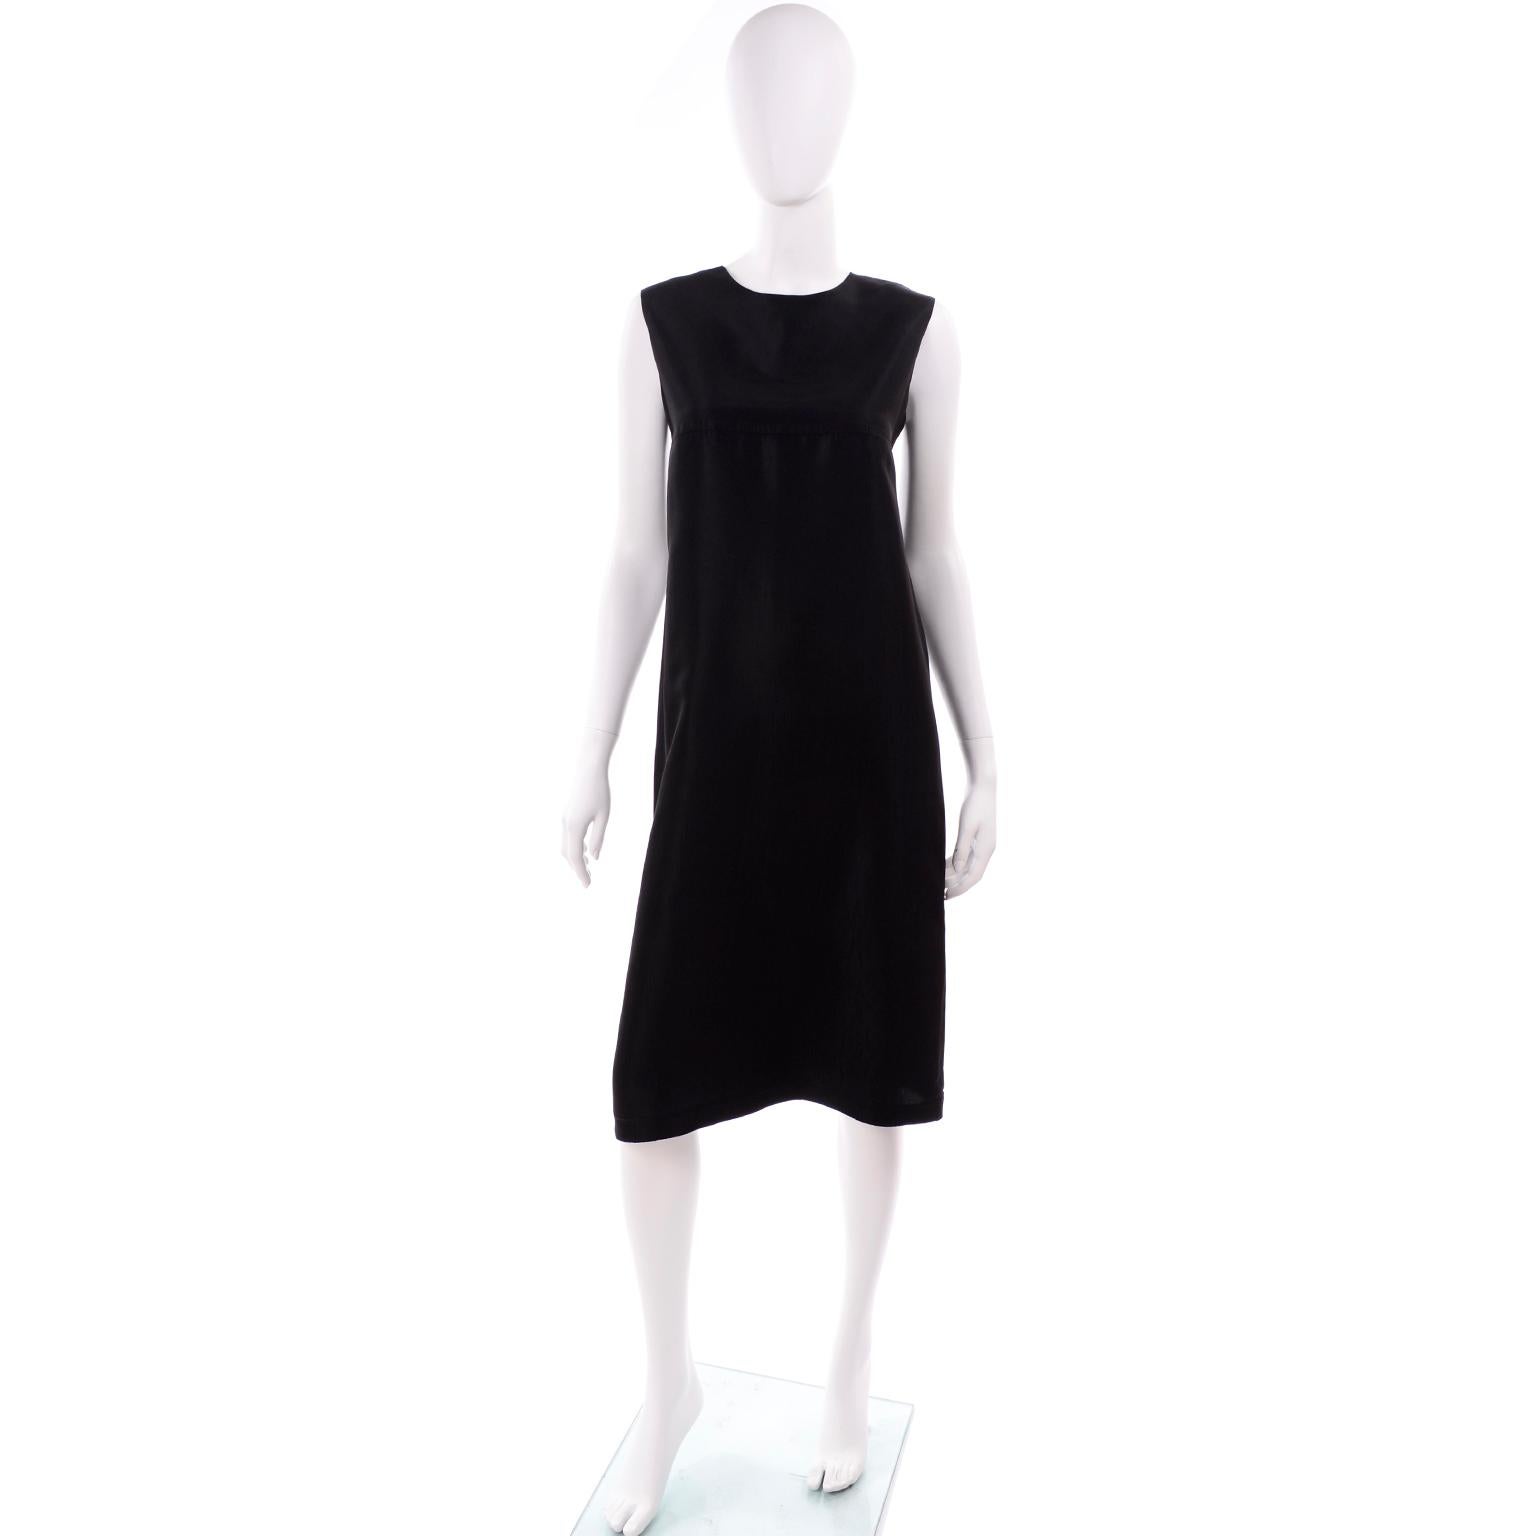 This is a stunning minimalist dress by Yohji Yamamoto +Noir. It is made of a black rayon or silk blend that is sturdy and opaque. The fabric has some subtle texture to it, adding some dimension. It has a seam across the bustline, and has a very